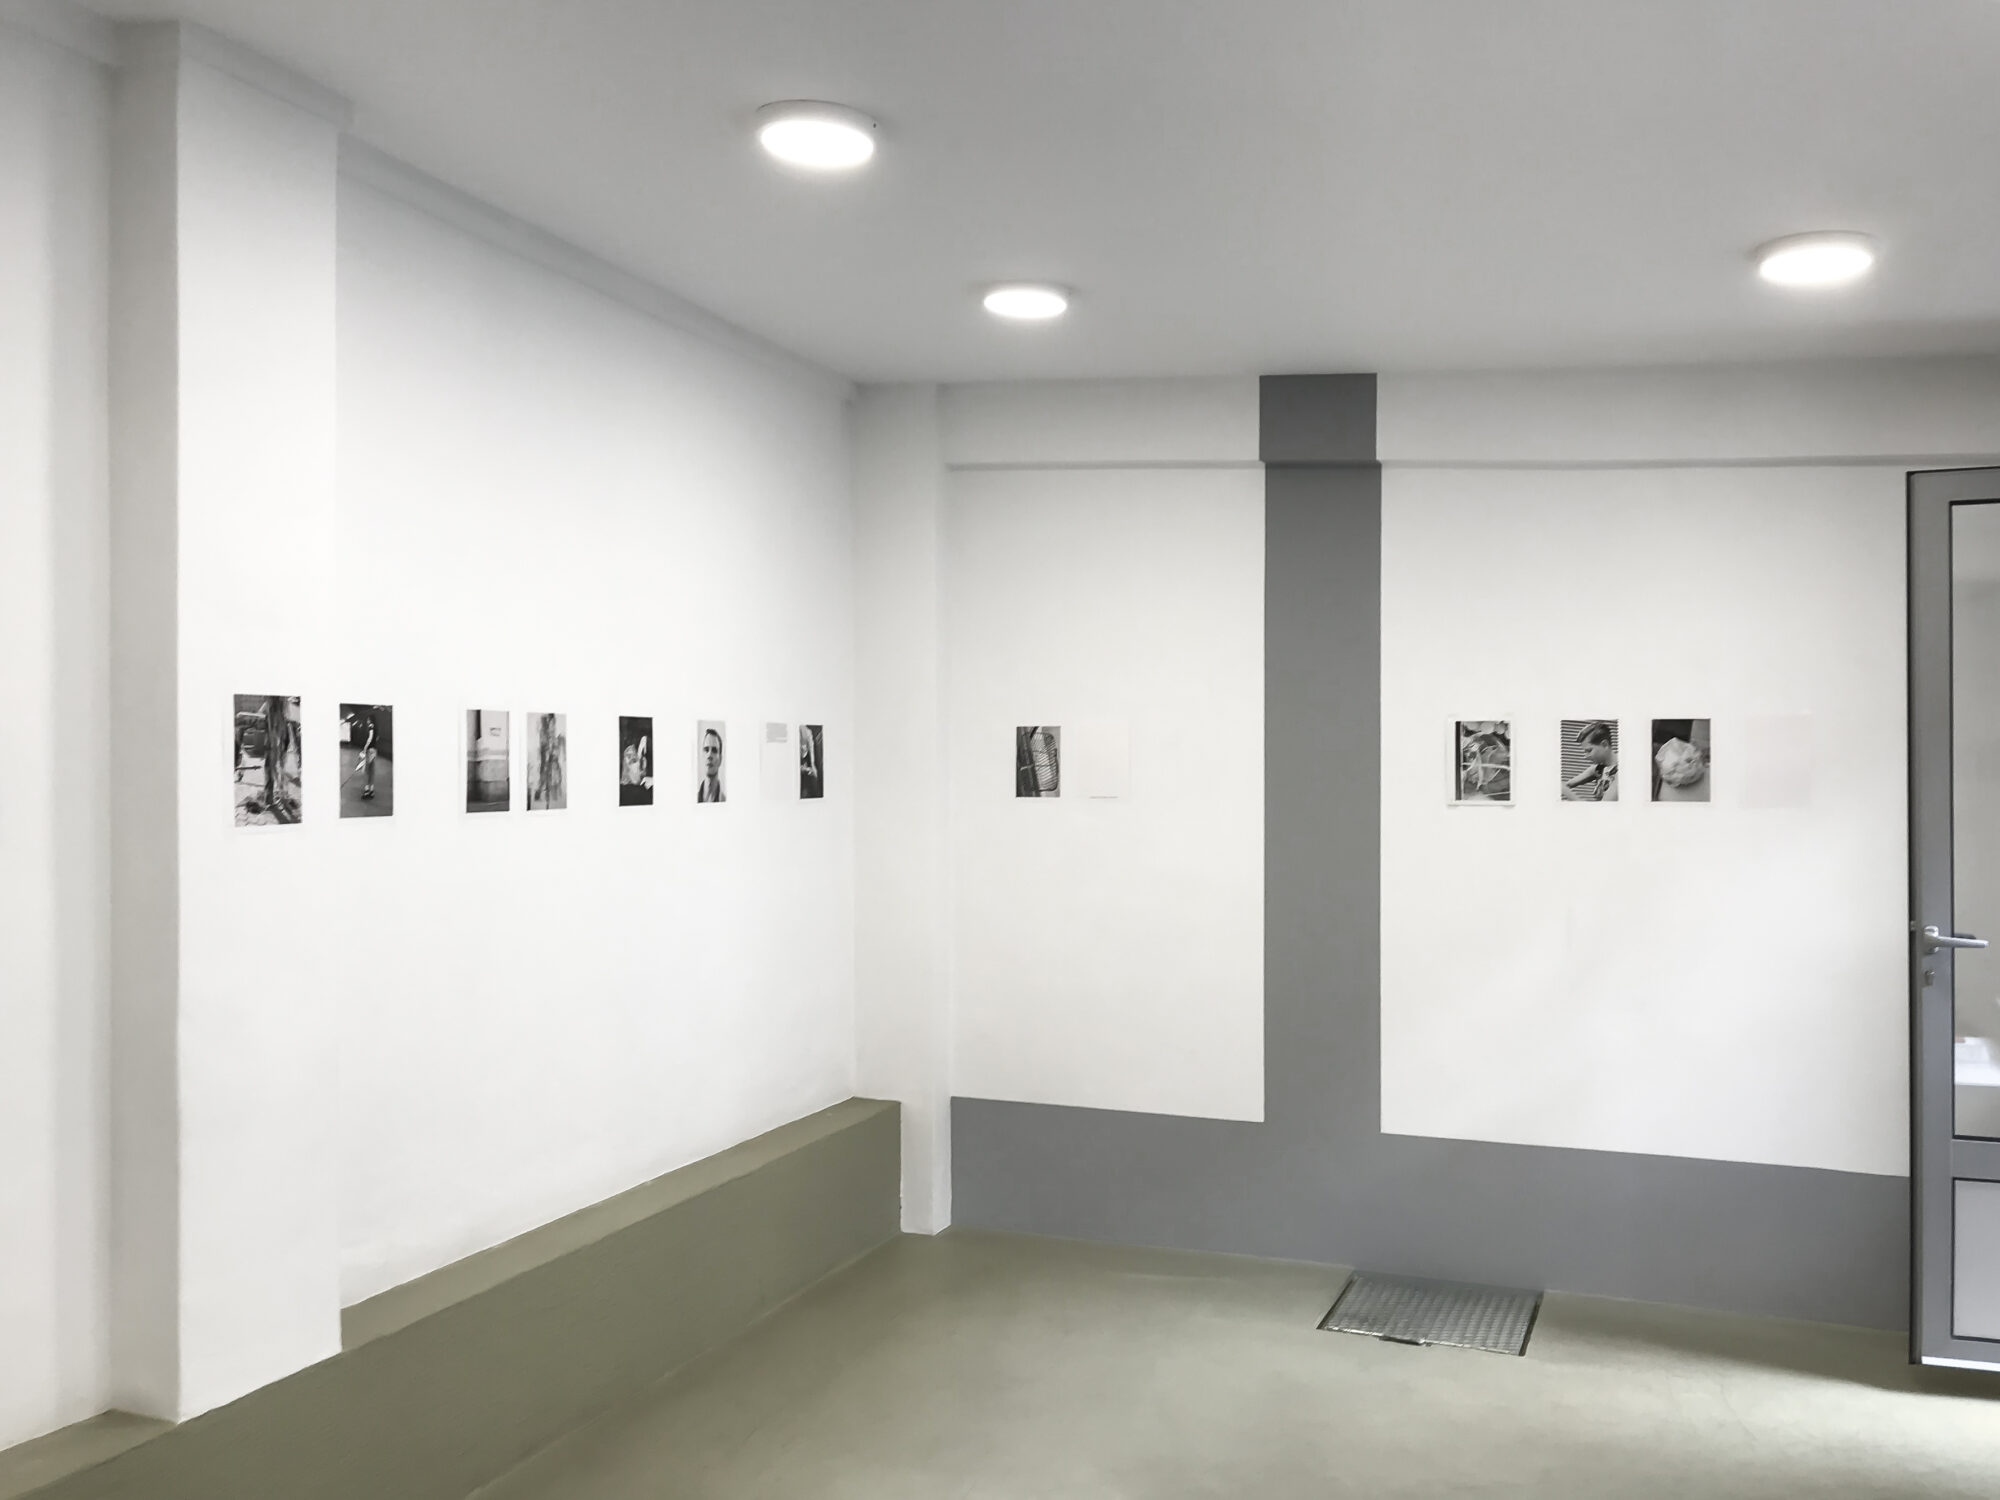 Máj/My, Spot Gallery Zabreg, 2019<br />
pages from the book Máj/My, wallpainting